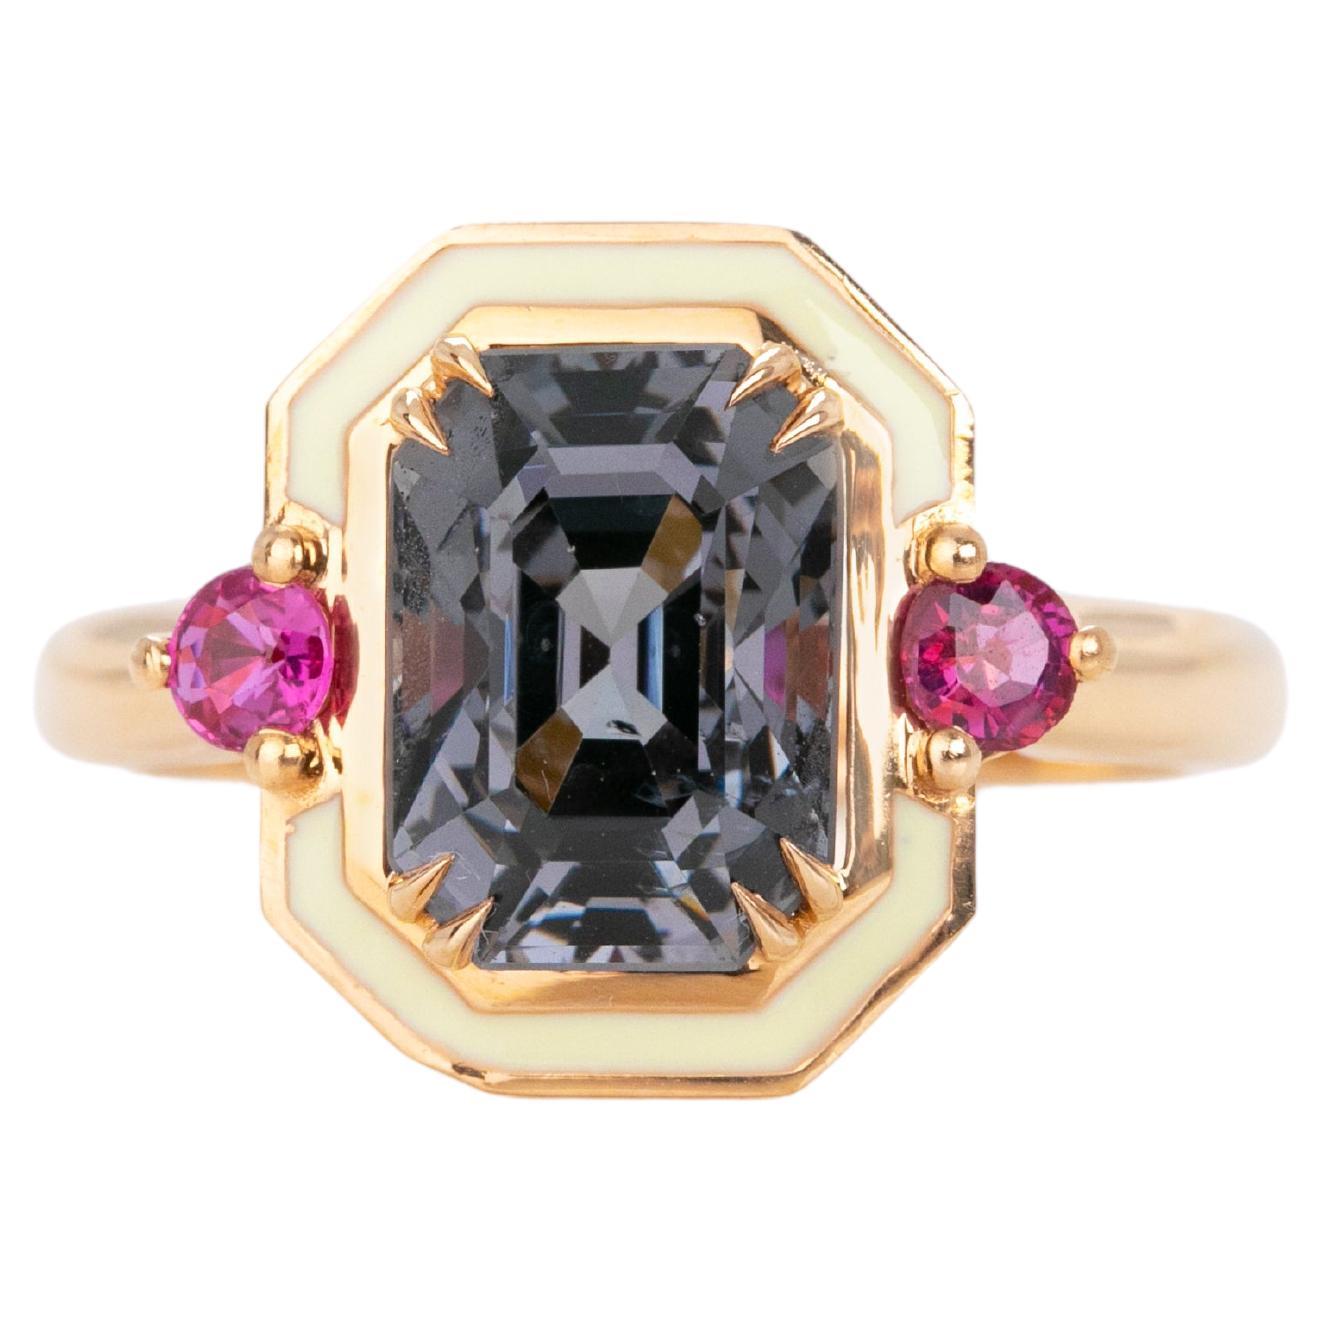 14K Gold 3.65 Ct Radiant Cut Spinal & Ruby Enameled Cocktail Ring